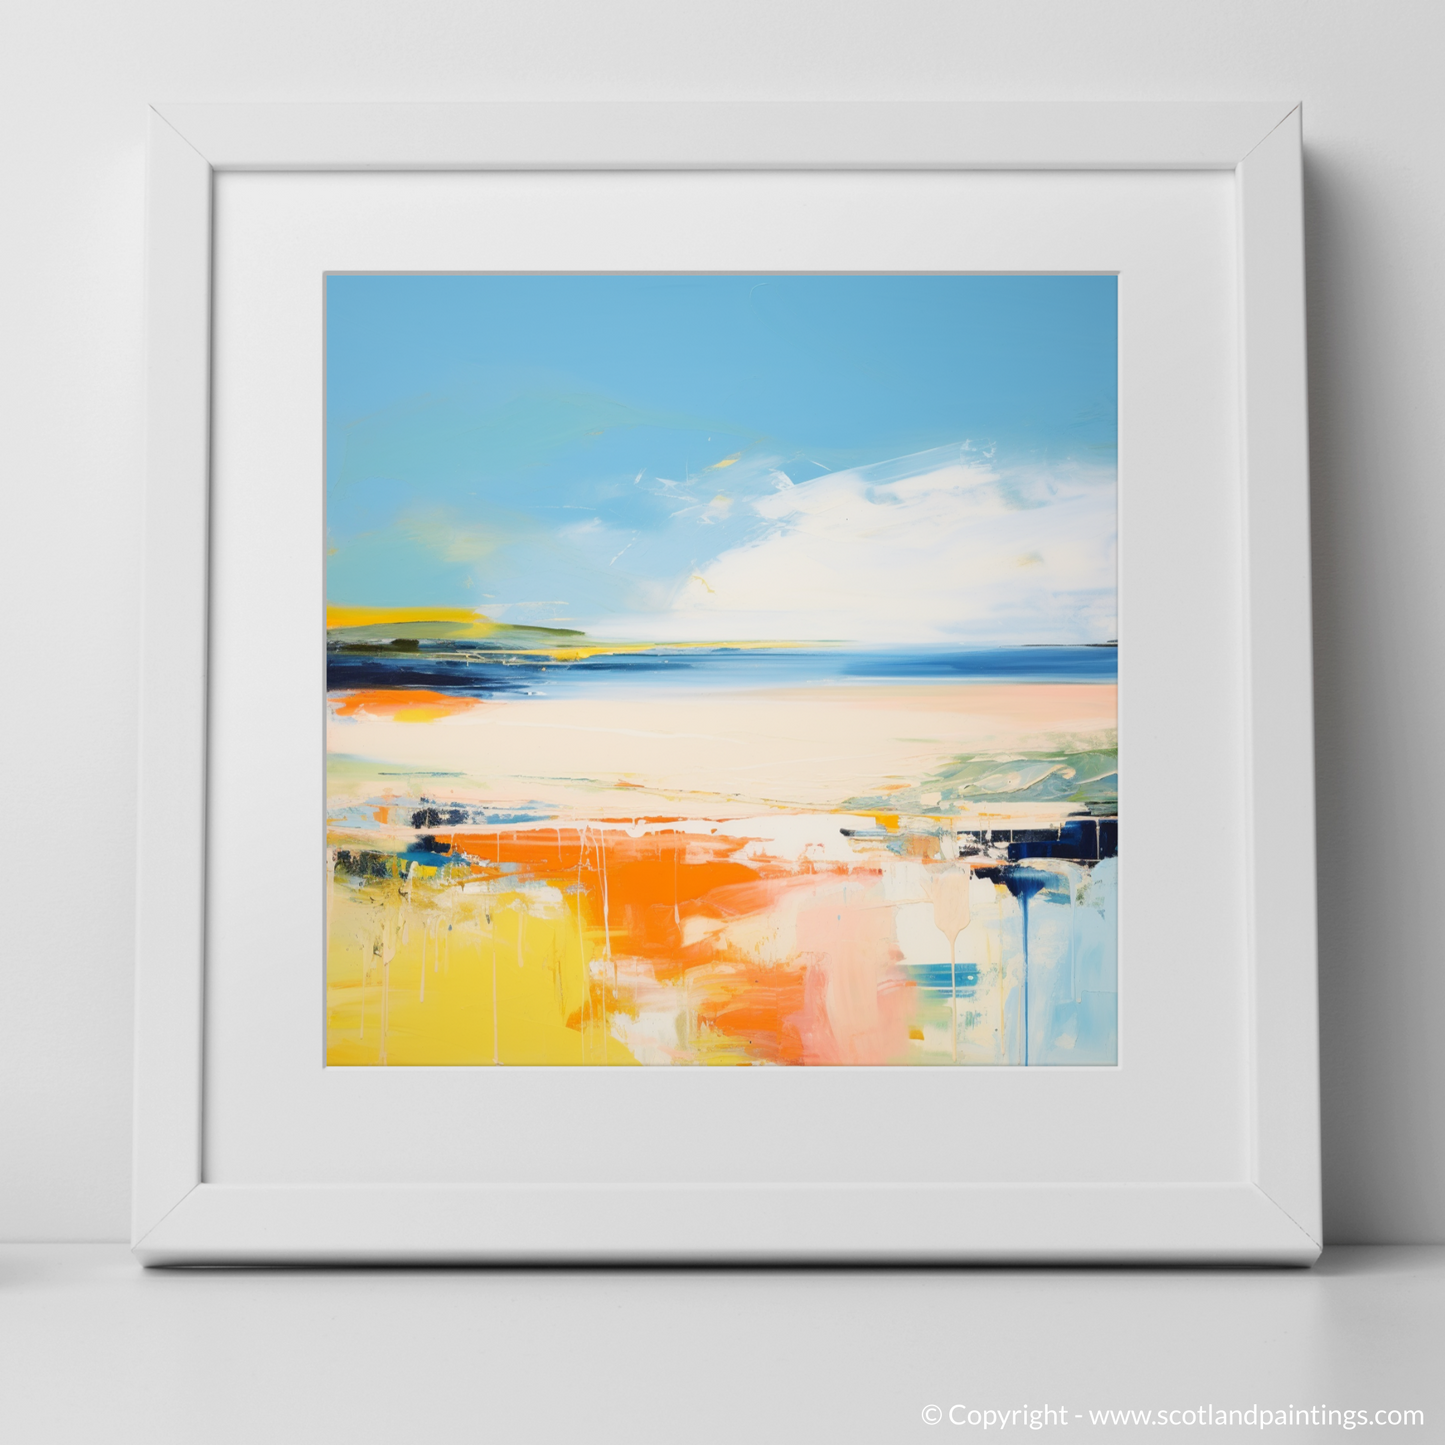 Art Print of Lunan Bay, Angus in summer with a white frame